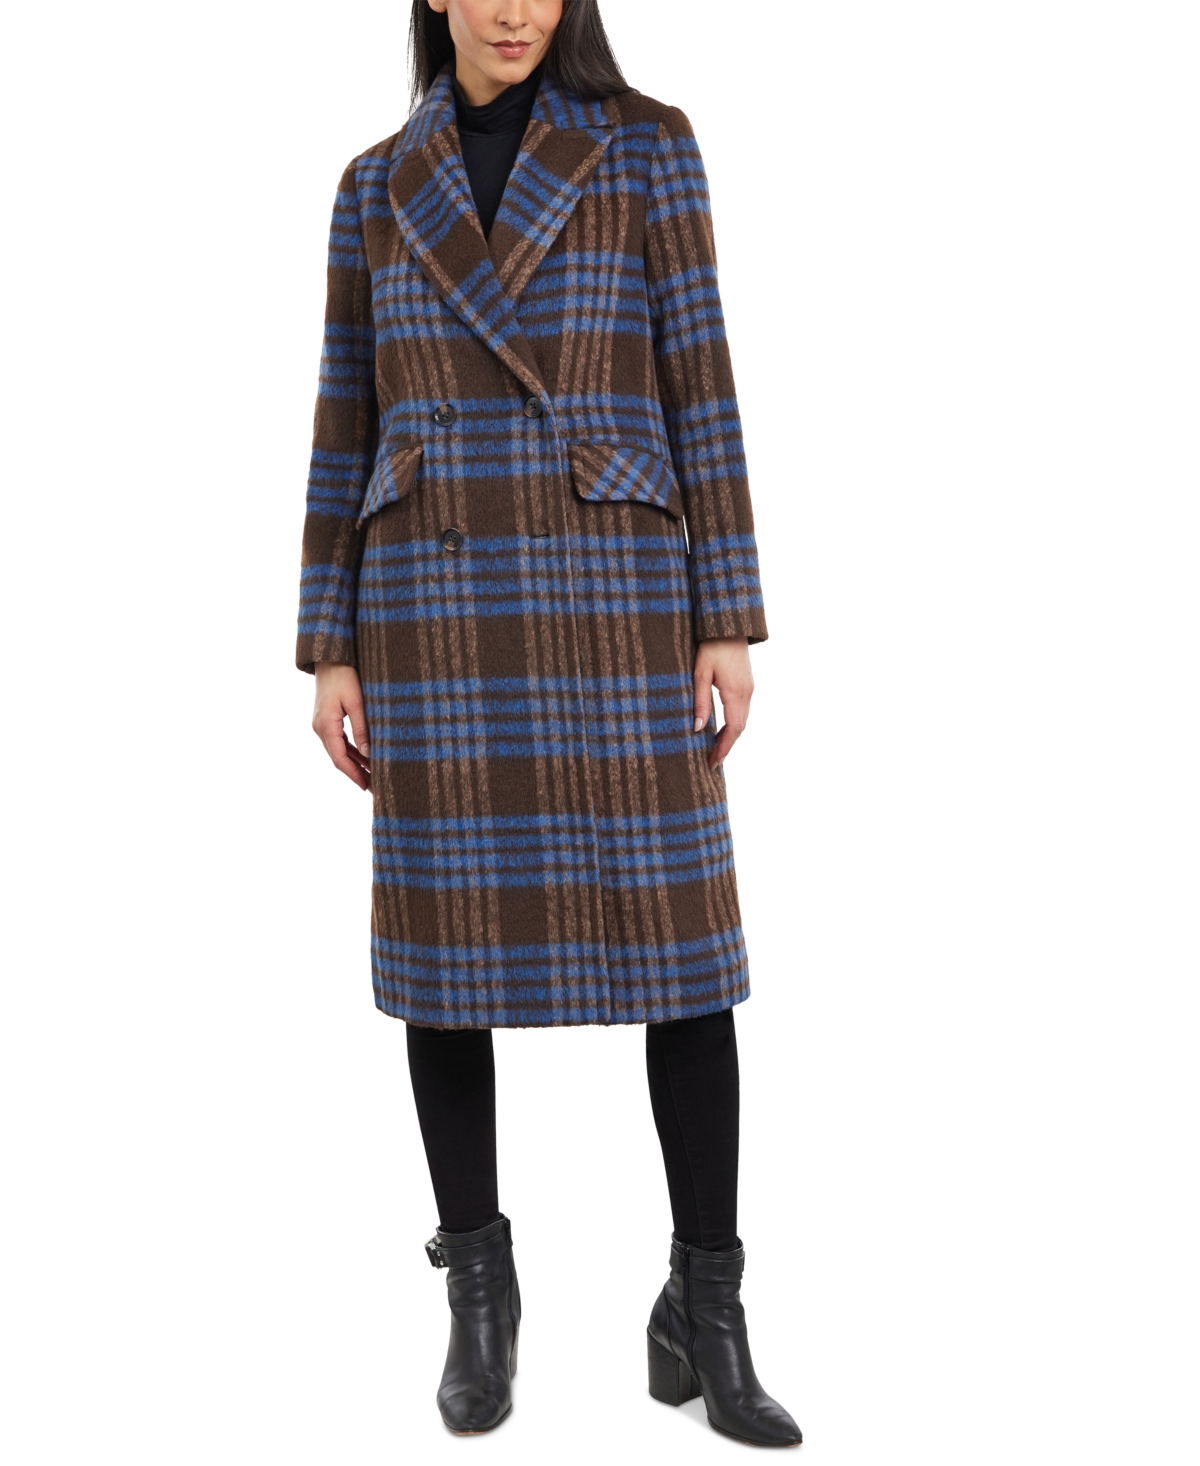 Women's Double-Breasted Notch-Collar Plaid Coat - Blue Brown Plaid